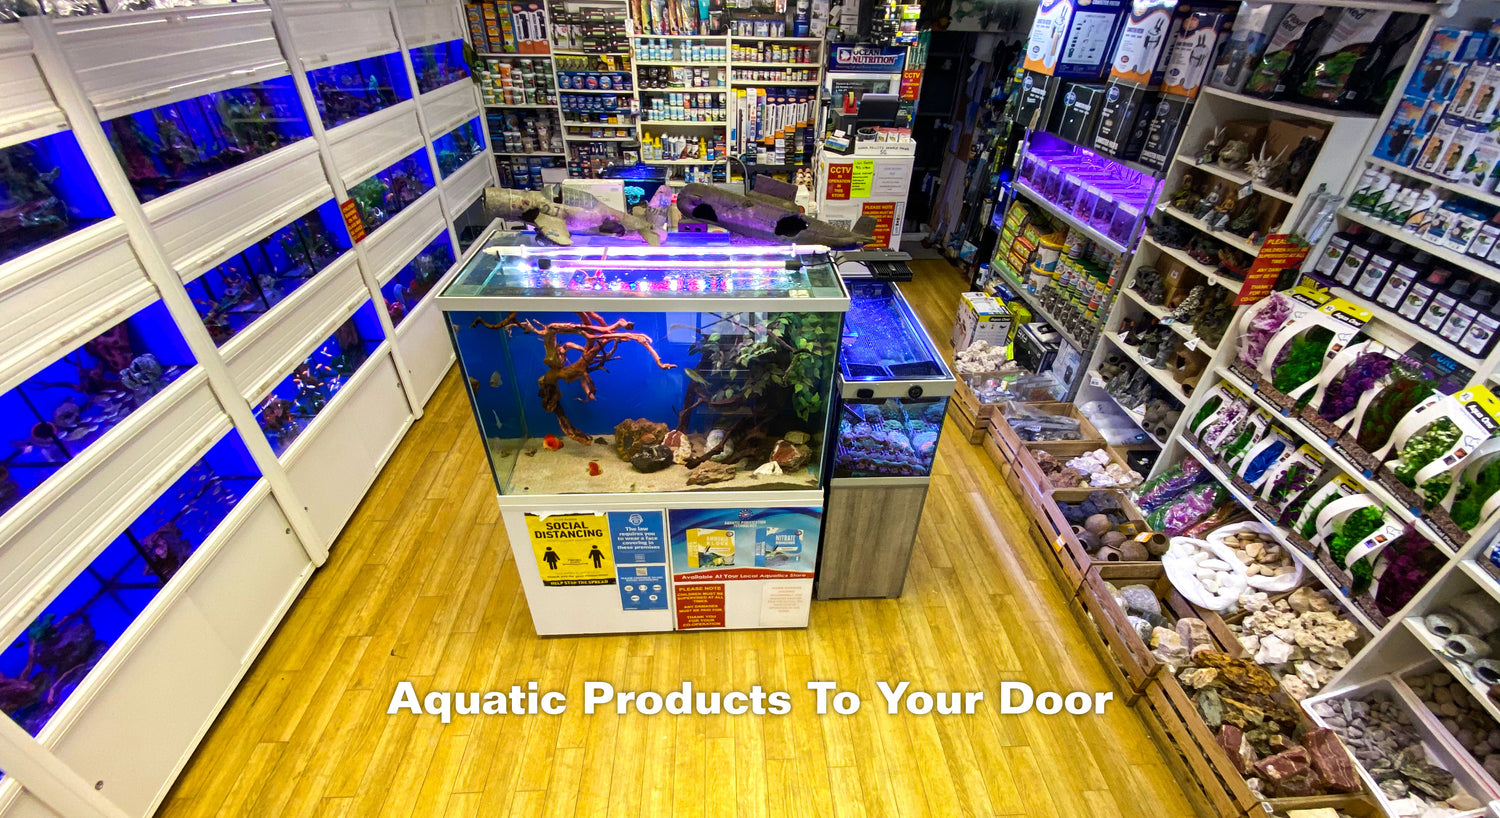 Image of store and Aquatic Products to your door